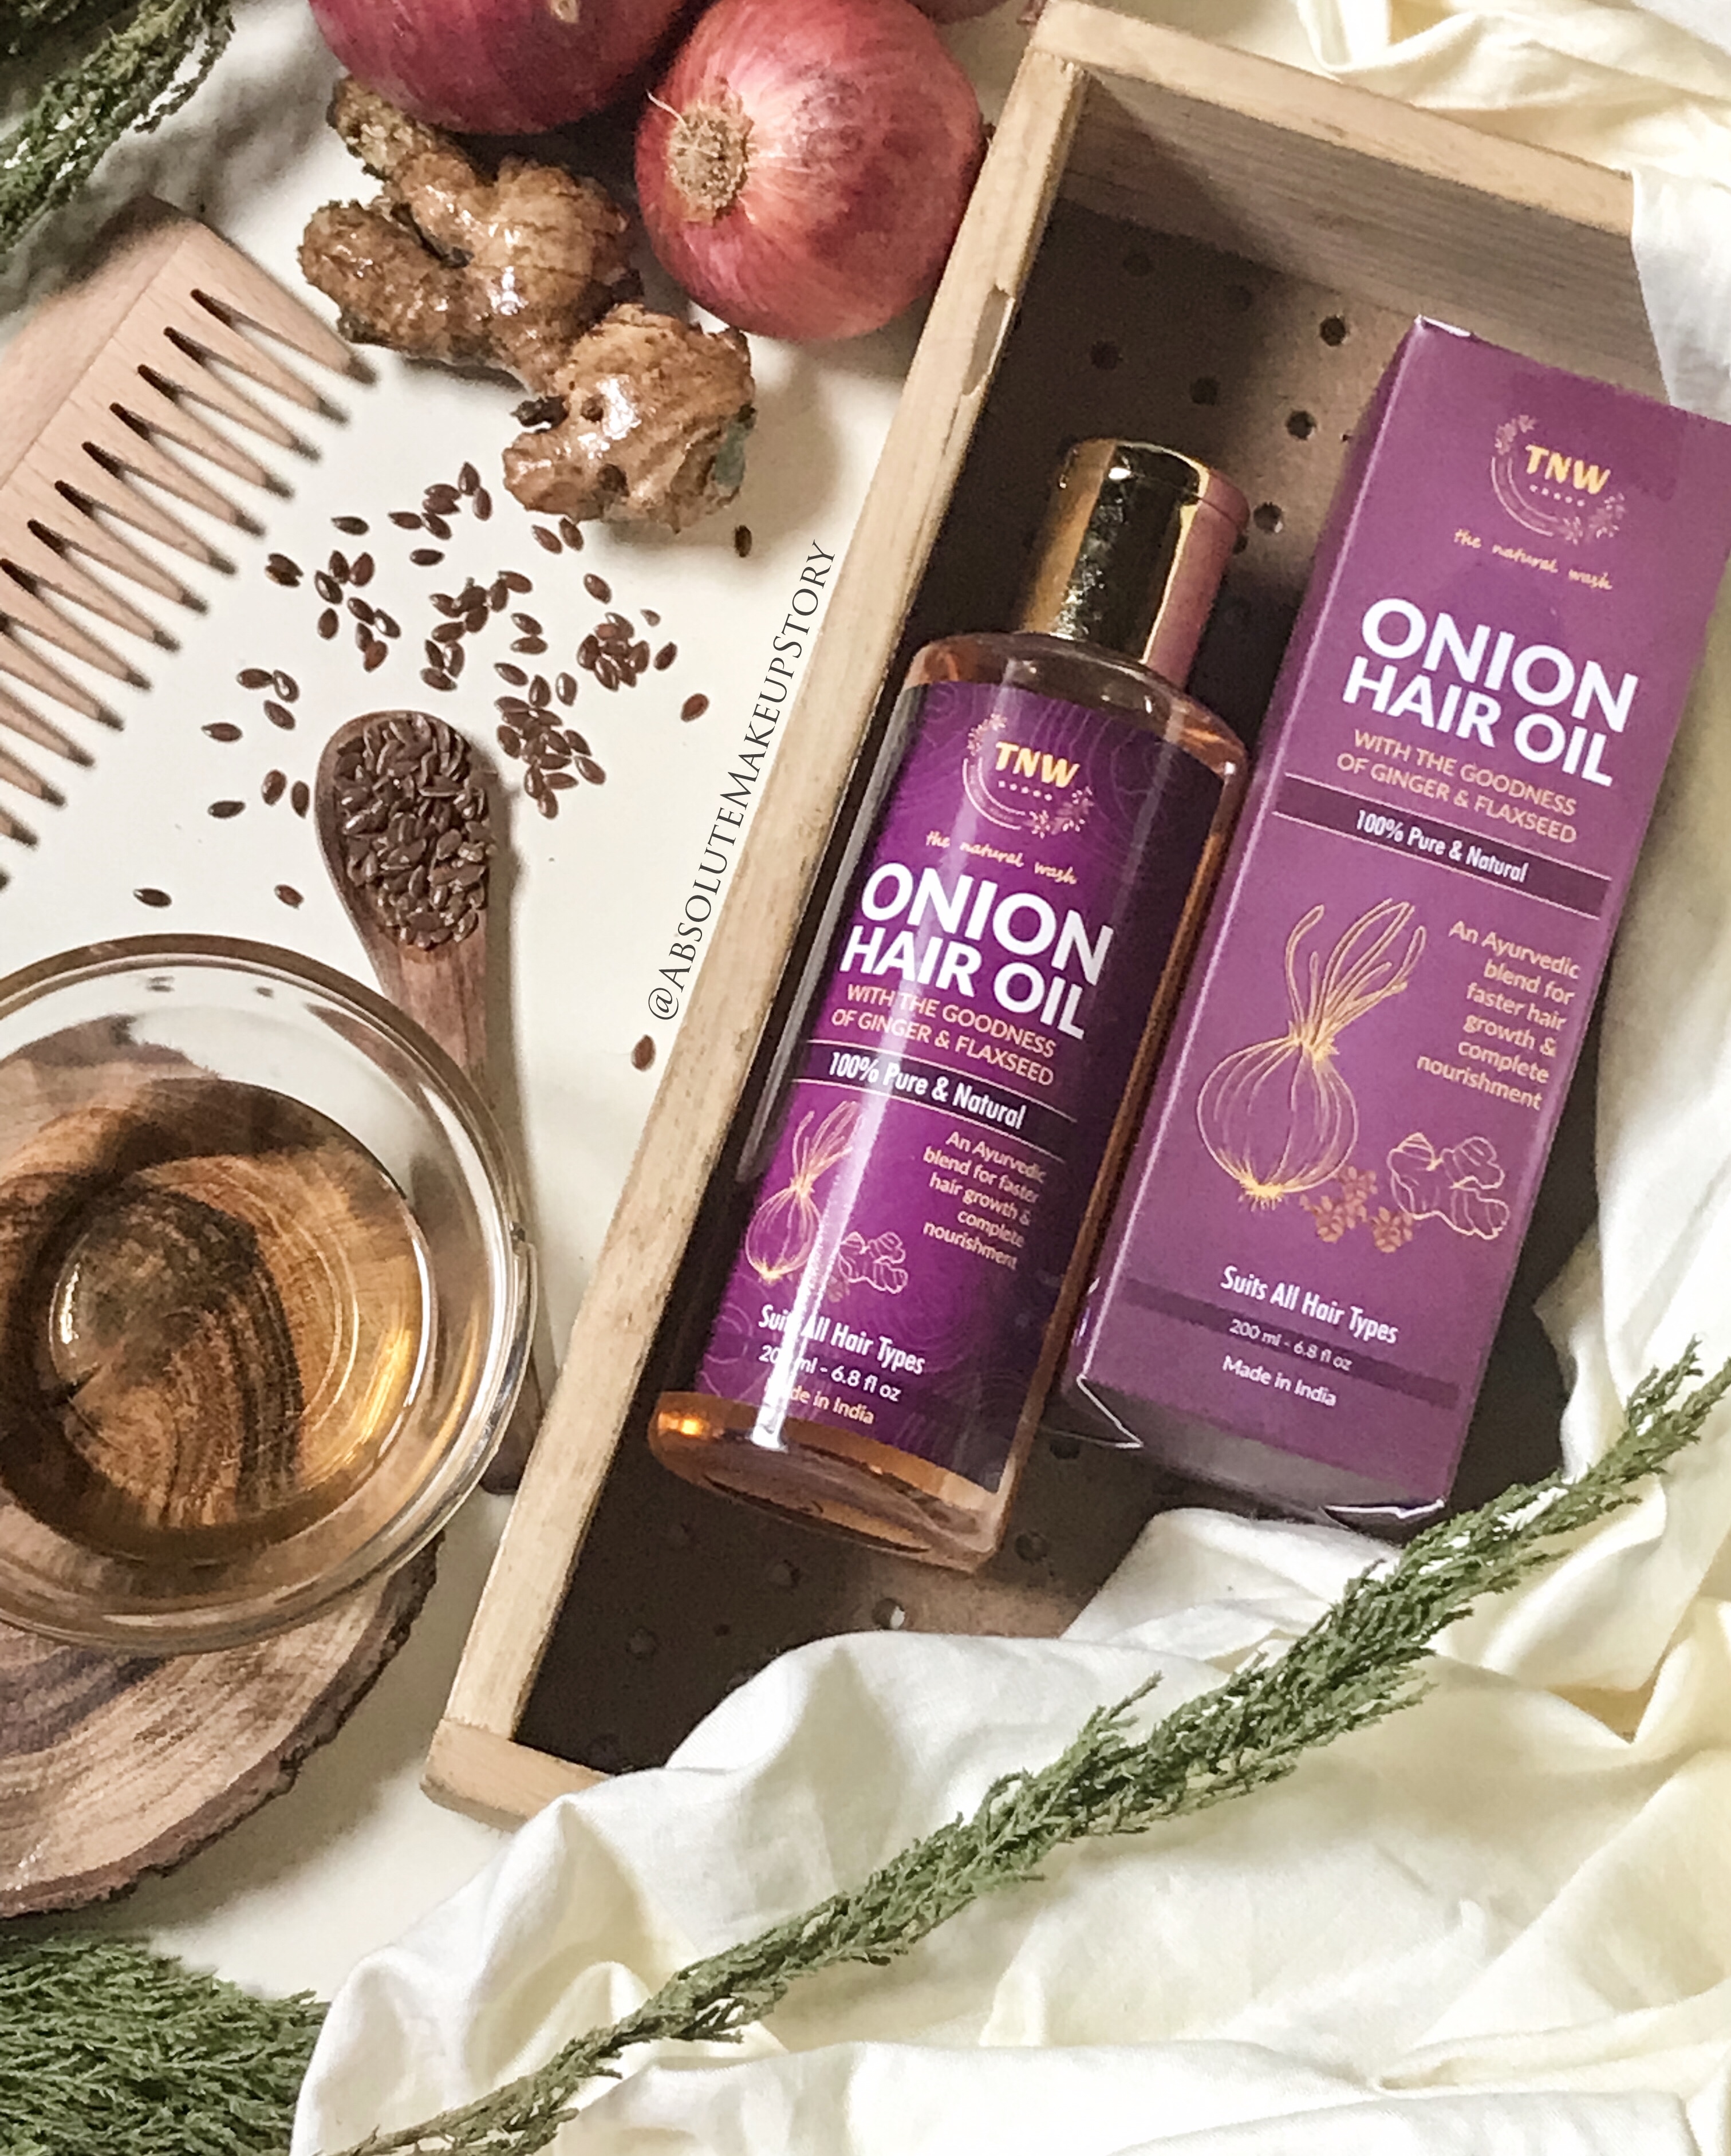 🌸 TNW (THE NATURAL WASH ) ONION HAIR OIL REVIEW 🌸 – Absolute makeup story